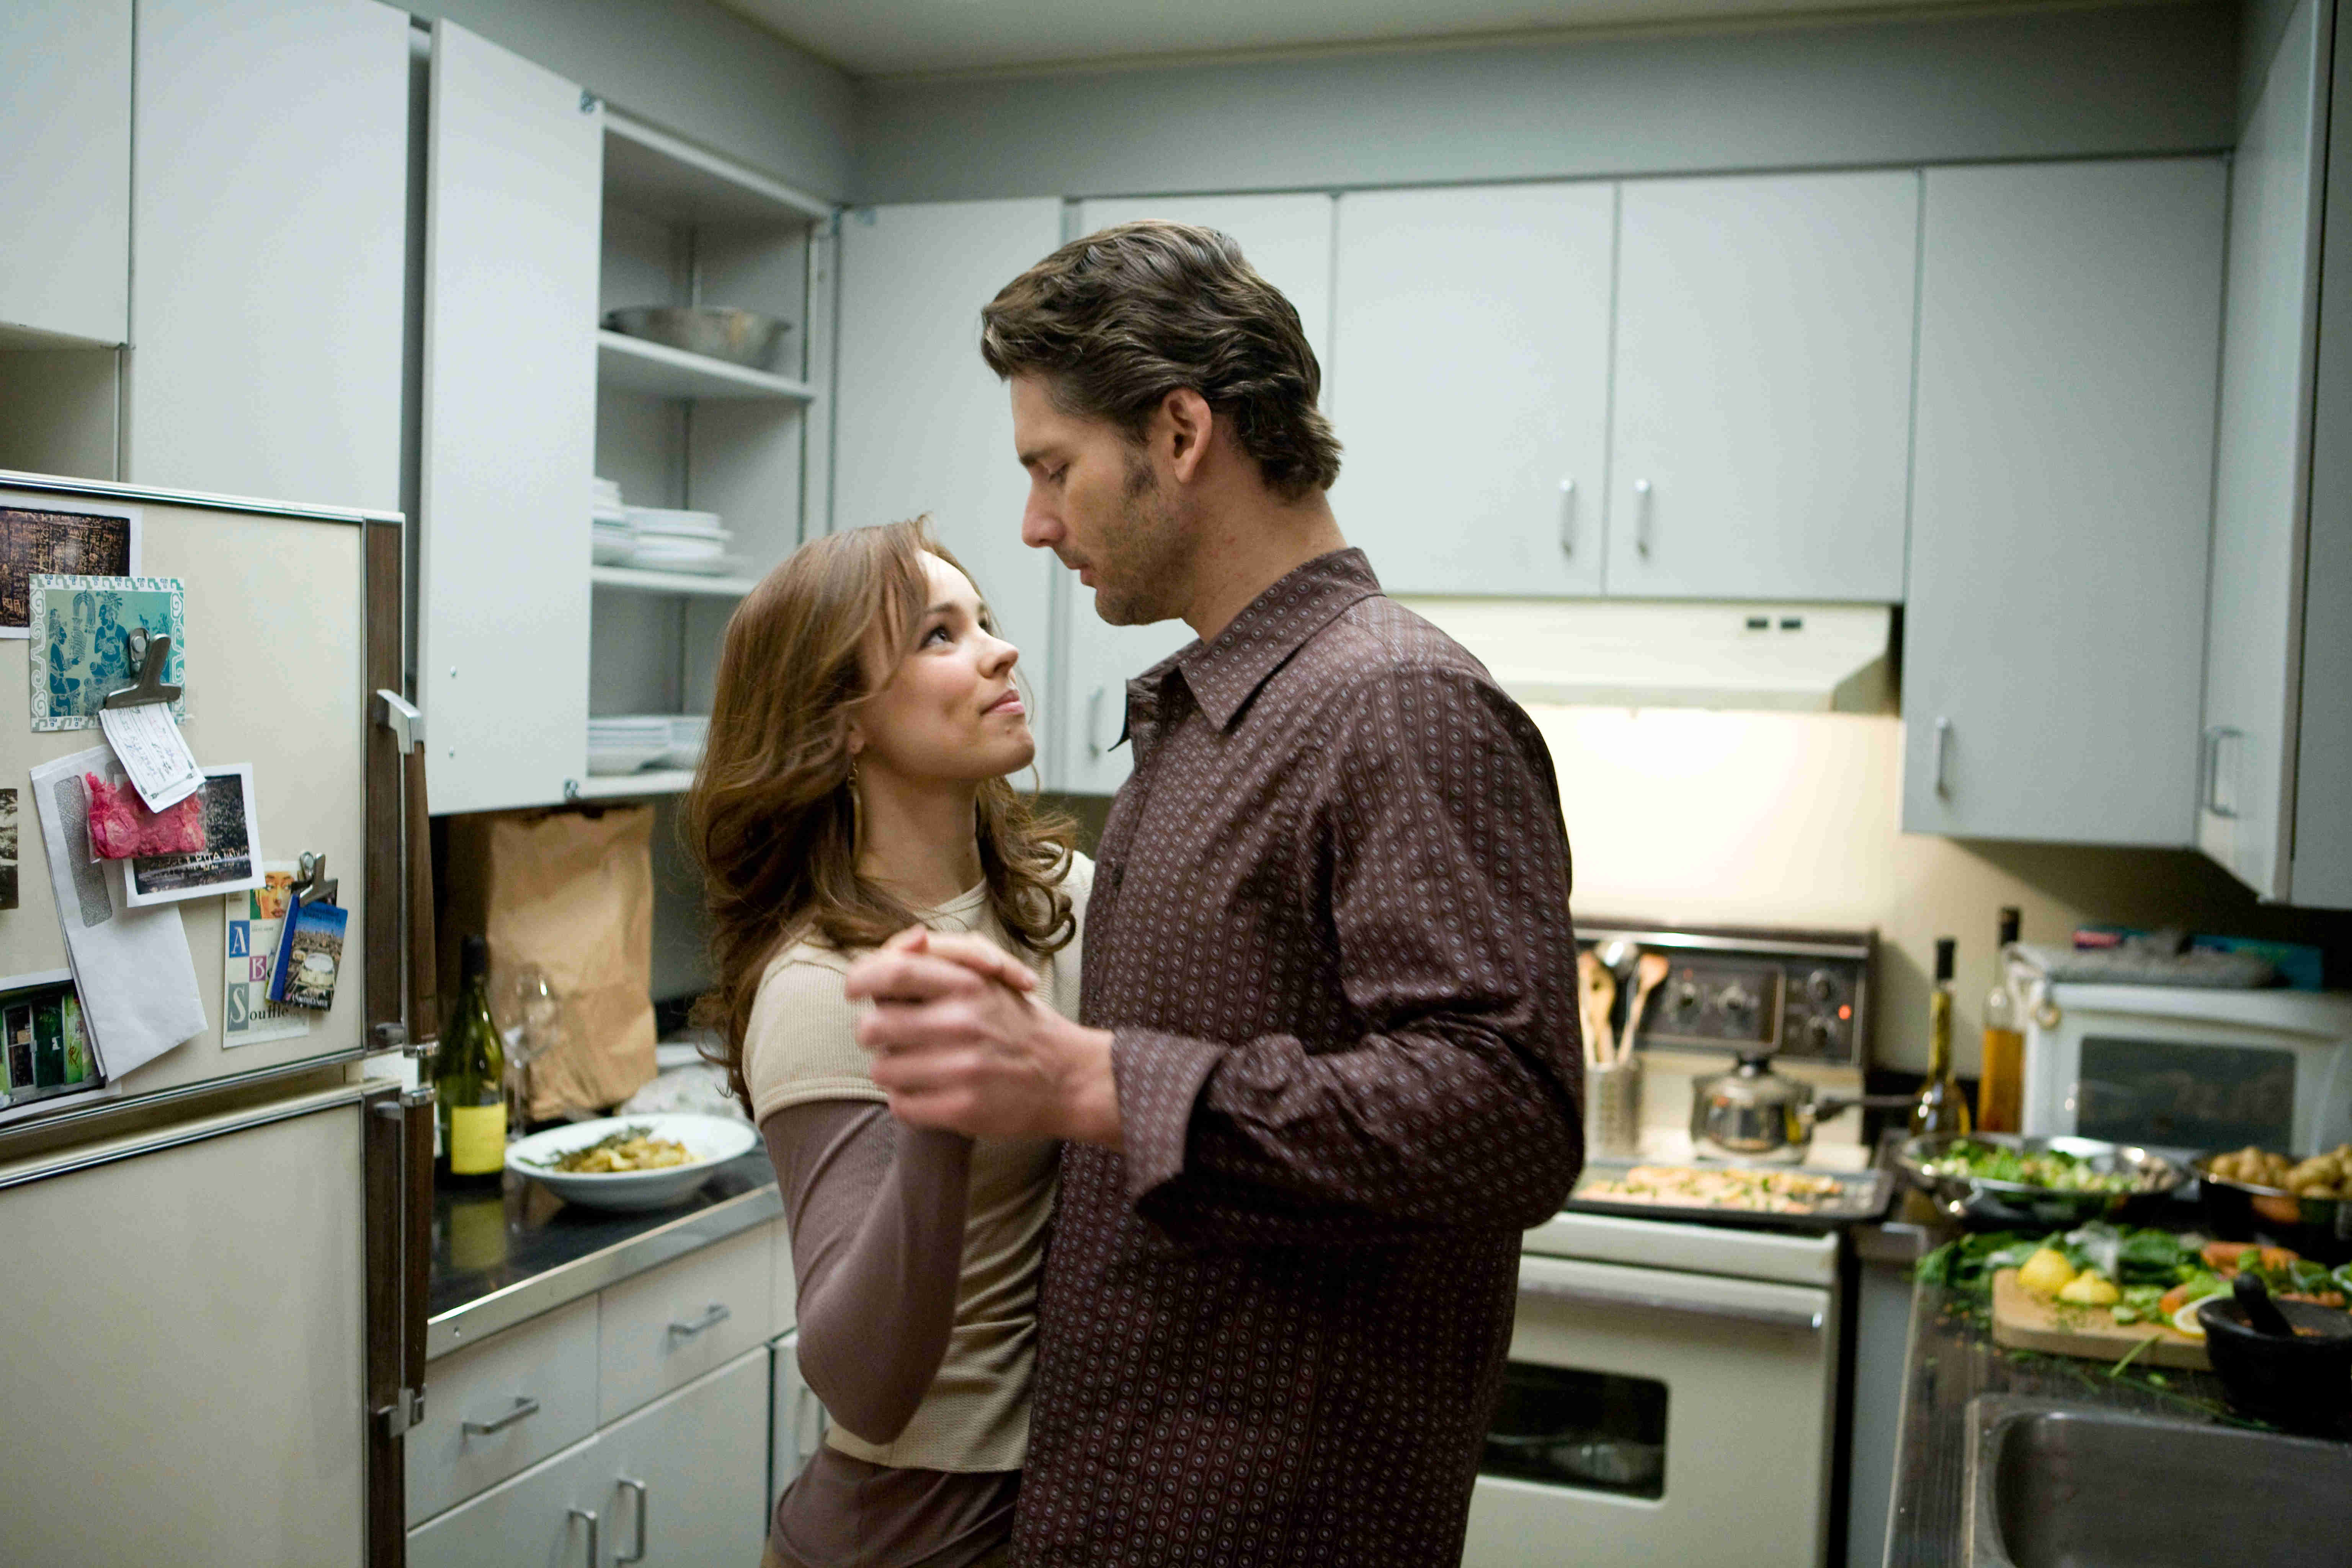 Rachel McAdams stars as Clare Abshire and Eric Bana stars as Henry DeTamble in New Line Cinema's The Time Traveler's Wife (2009). Photo credit by Alan Markfield.